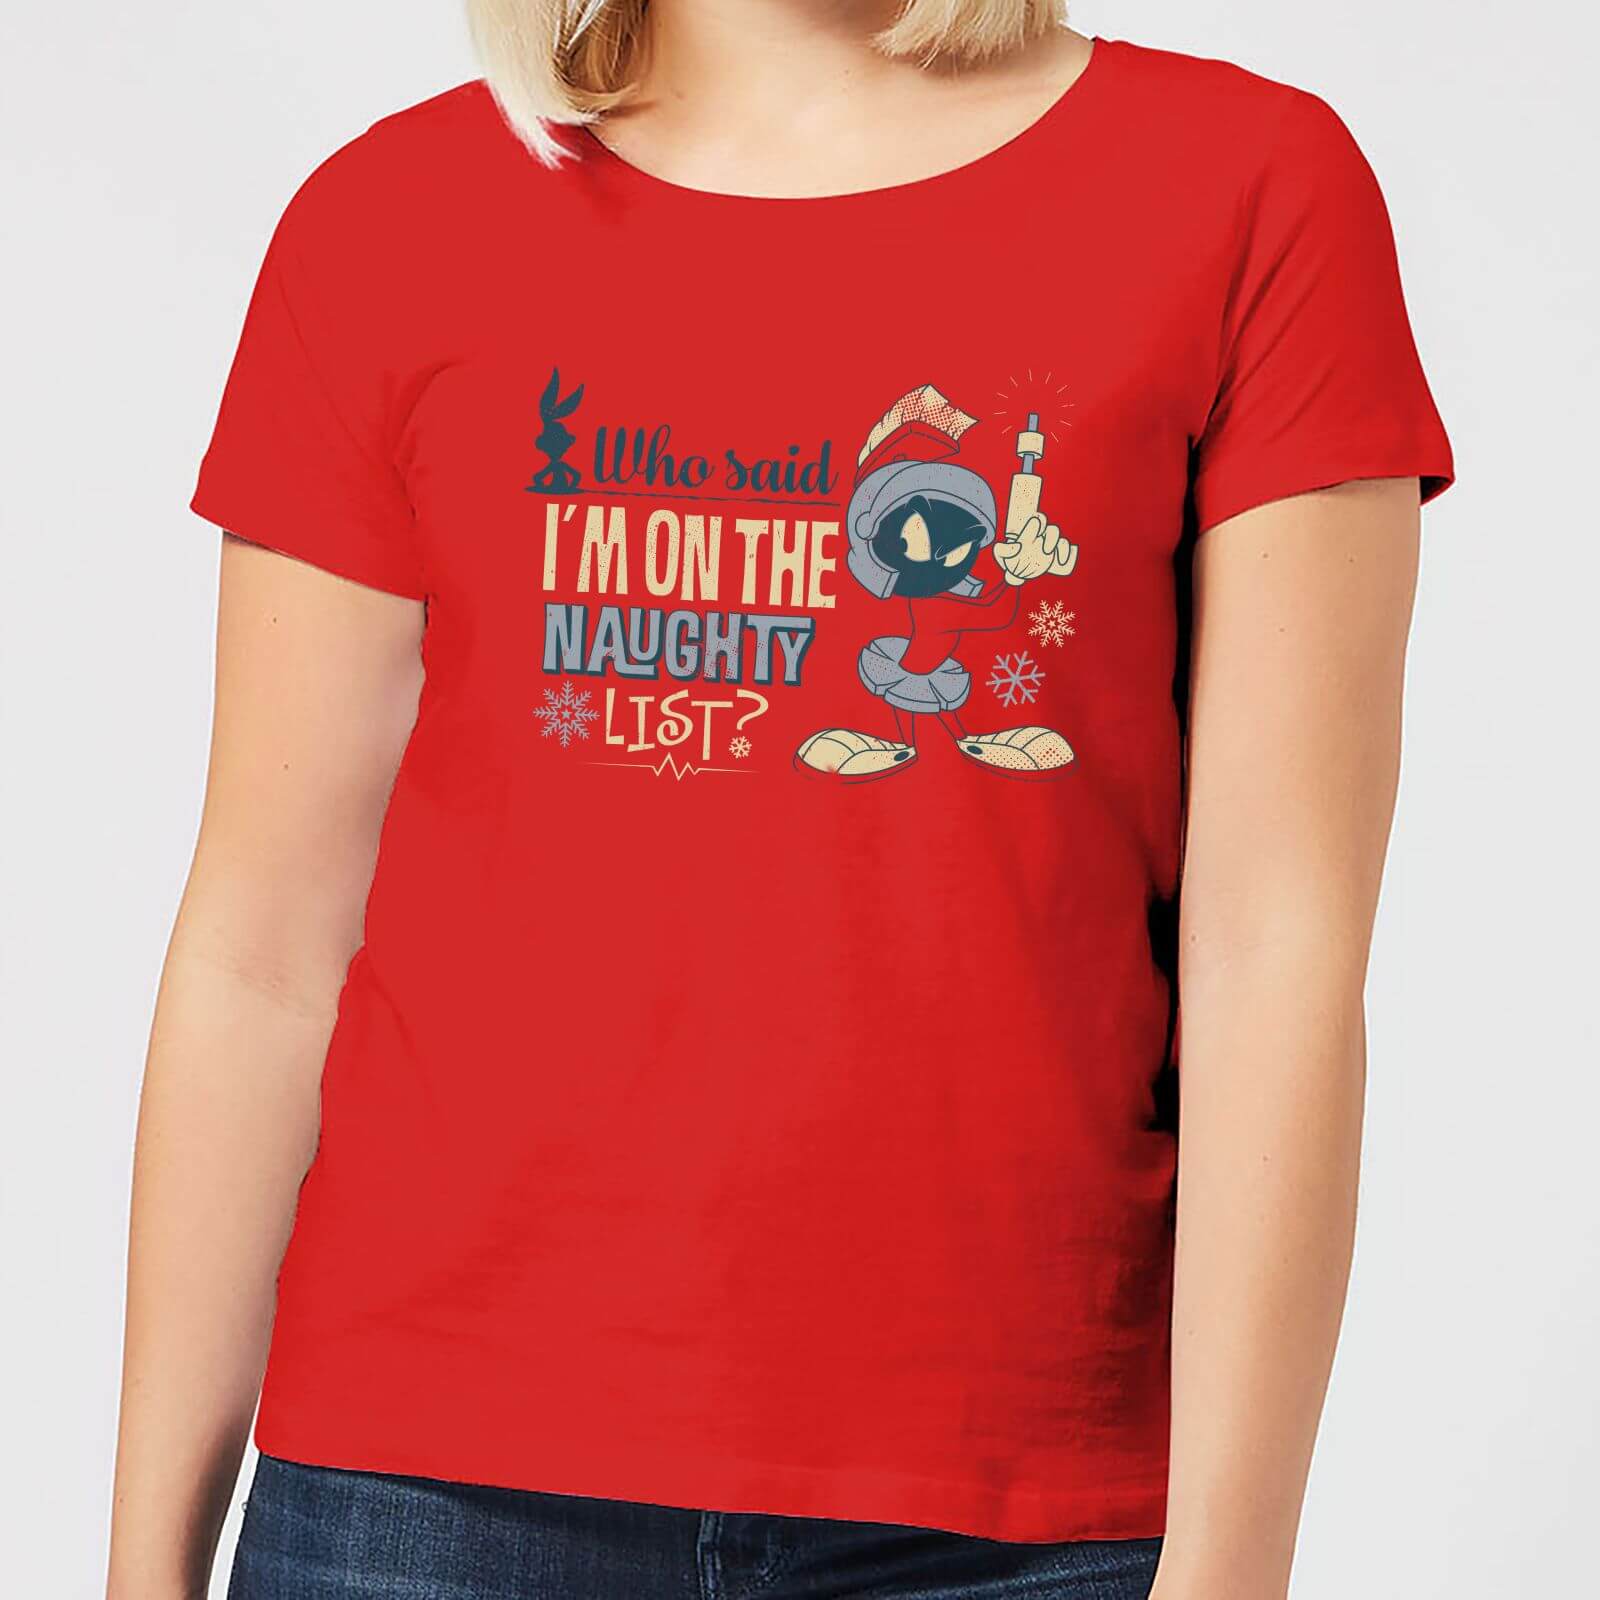 Looney Tunes Martian Who Said Im On The Naughty List Women's Christmas T-Shirt - Red - M - Red